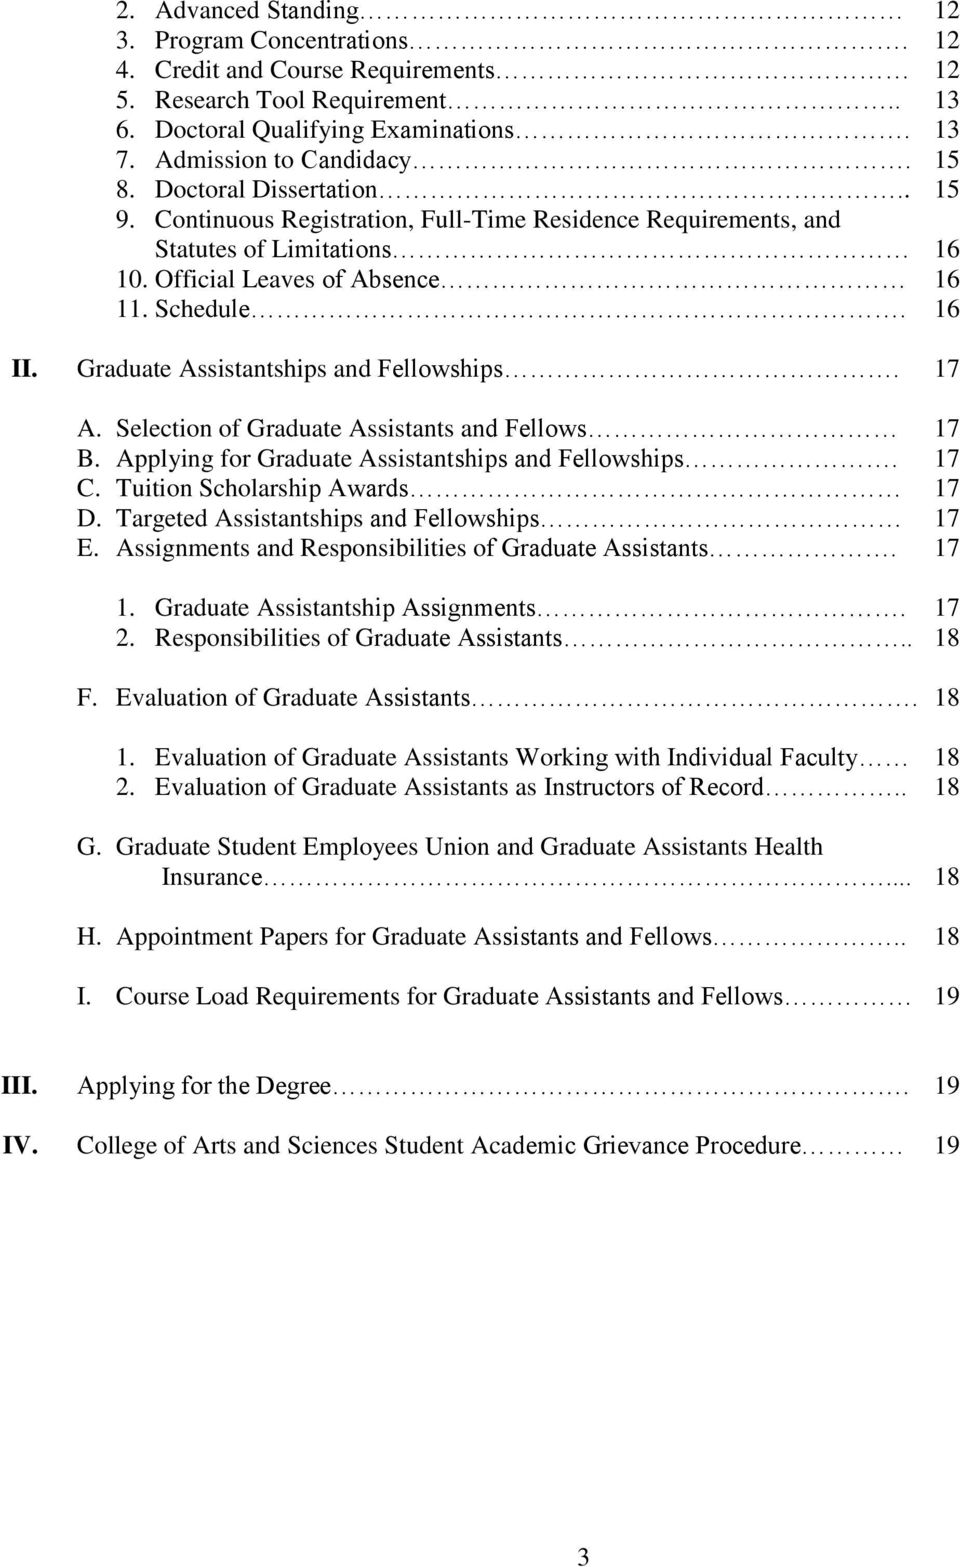 Graduate Assistantships and Fellowships. 17 A. Selection of Graduate Assistants and Fellows 17 B. Applying for Graduate Assistantships and Fellowships. 17 C. Tuition Scholarship Awards 17 D.